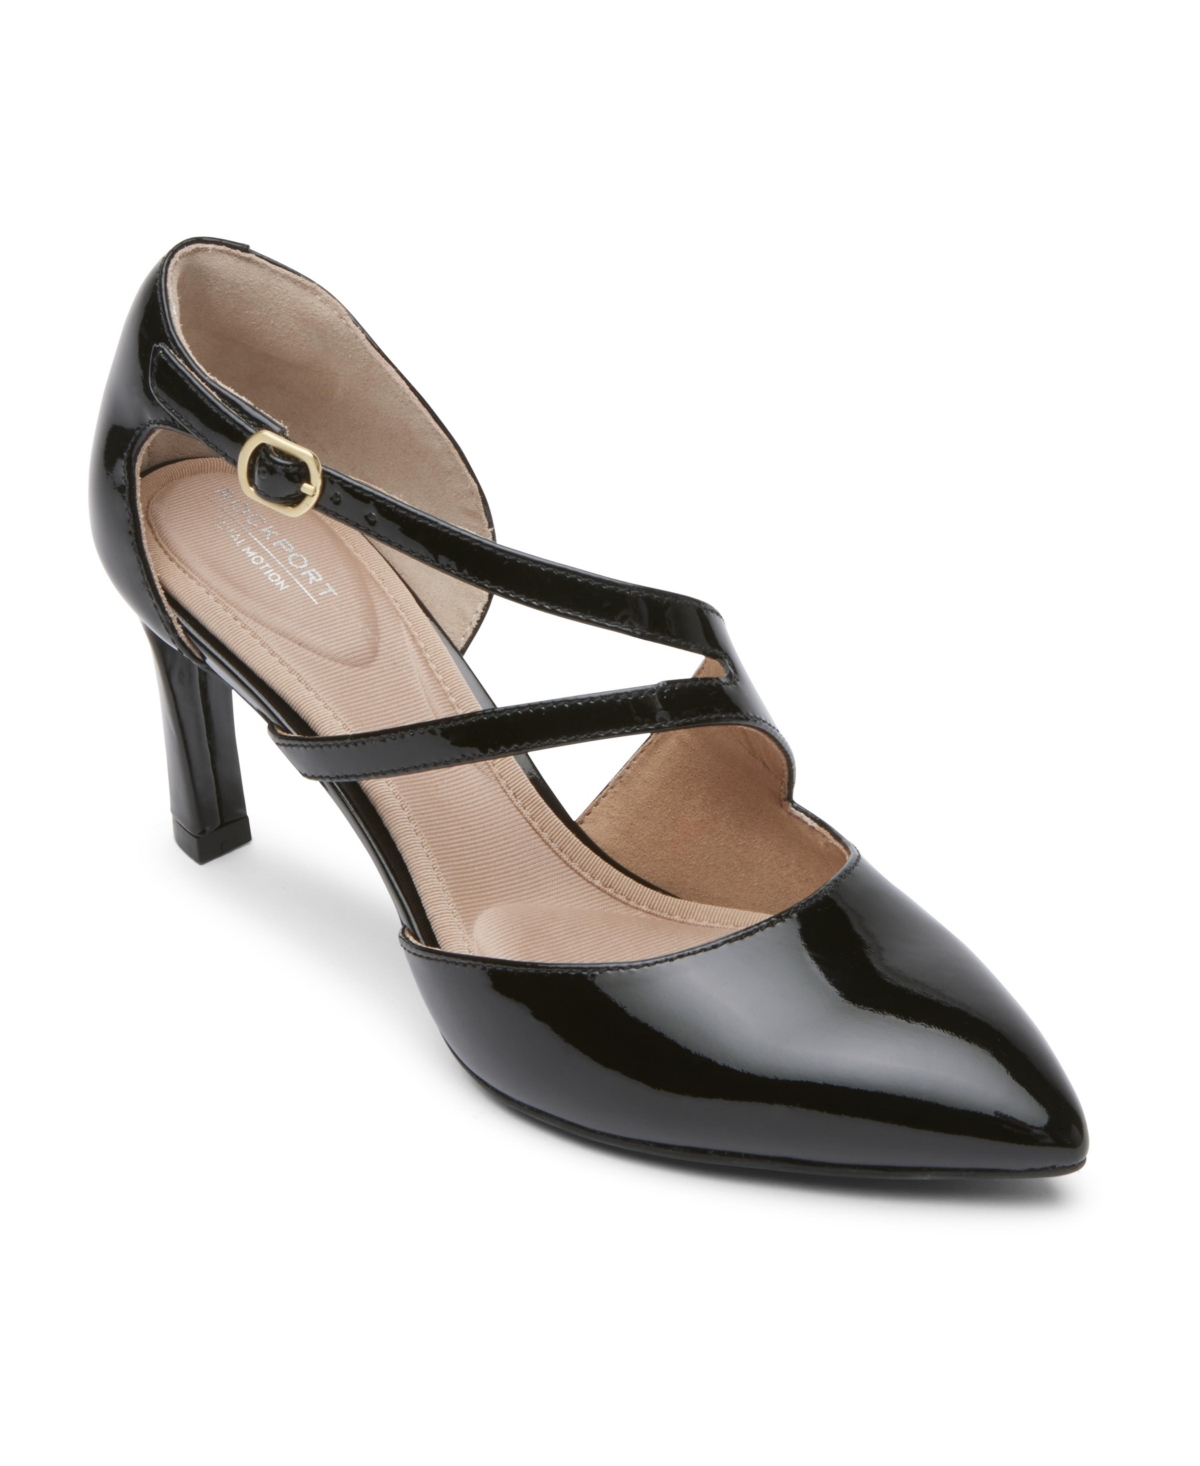 Rockport Sheehan Total Motion Pump In Black Patent Leather